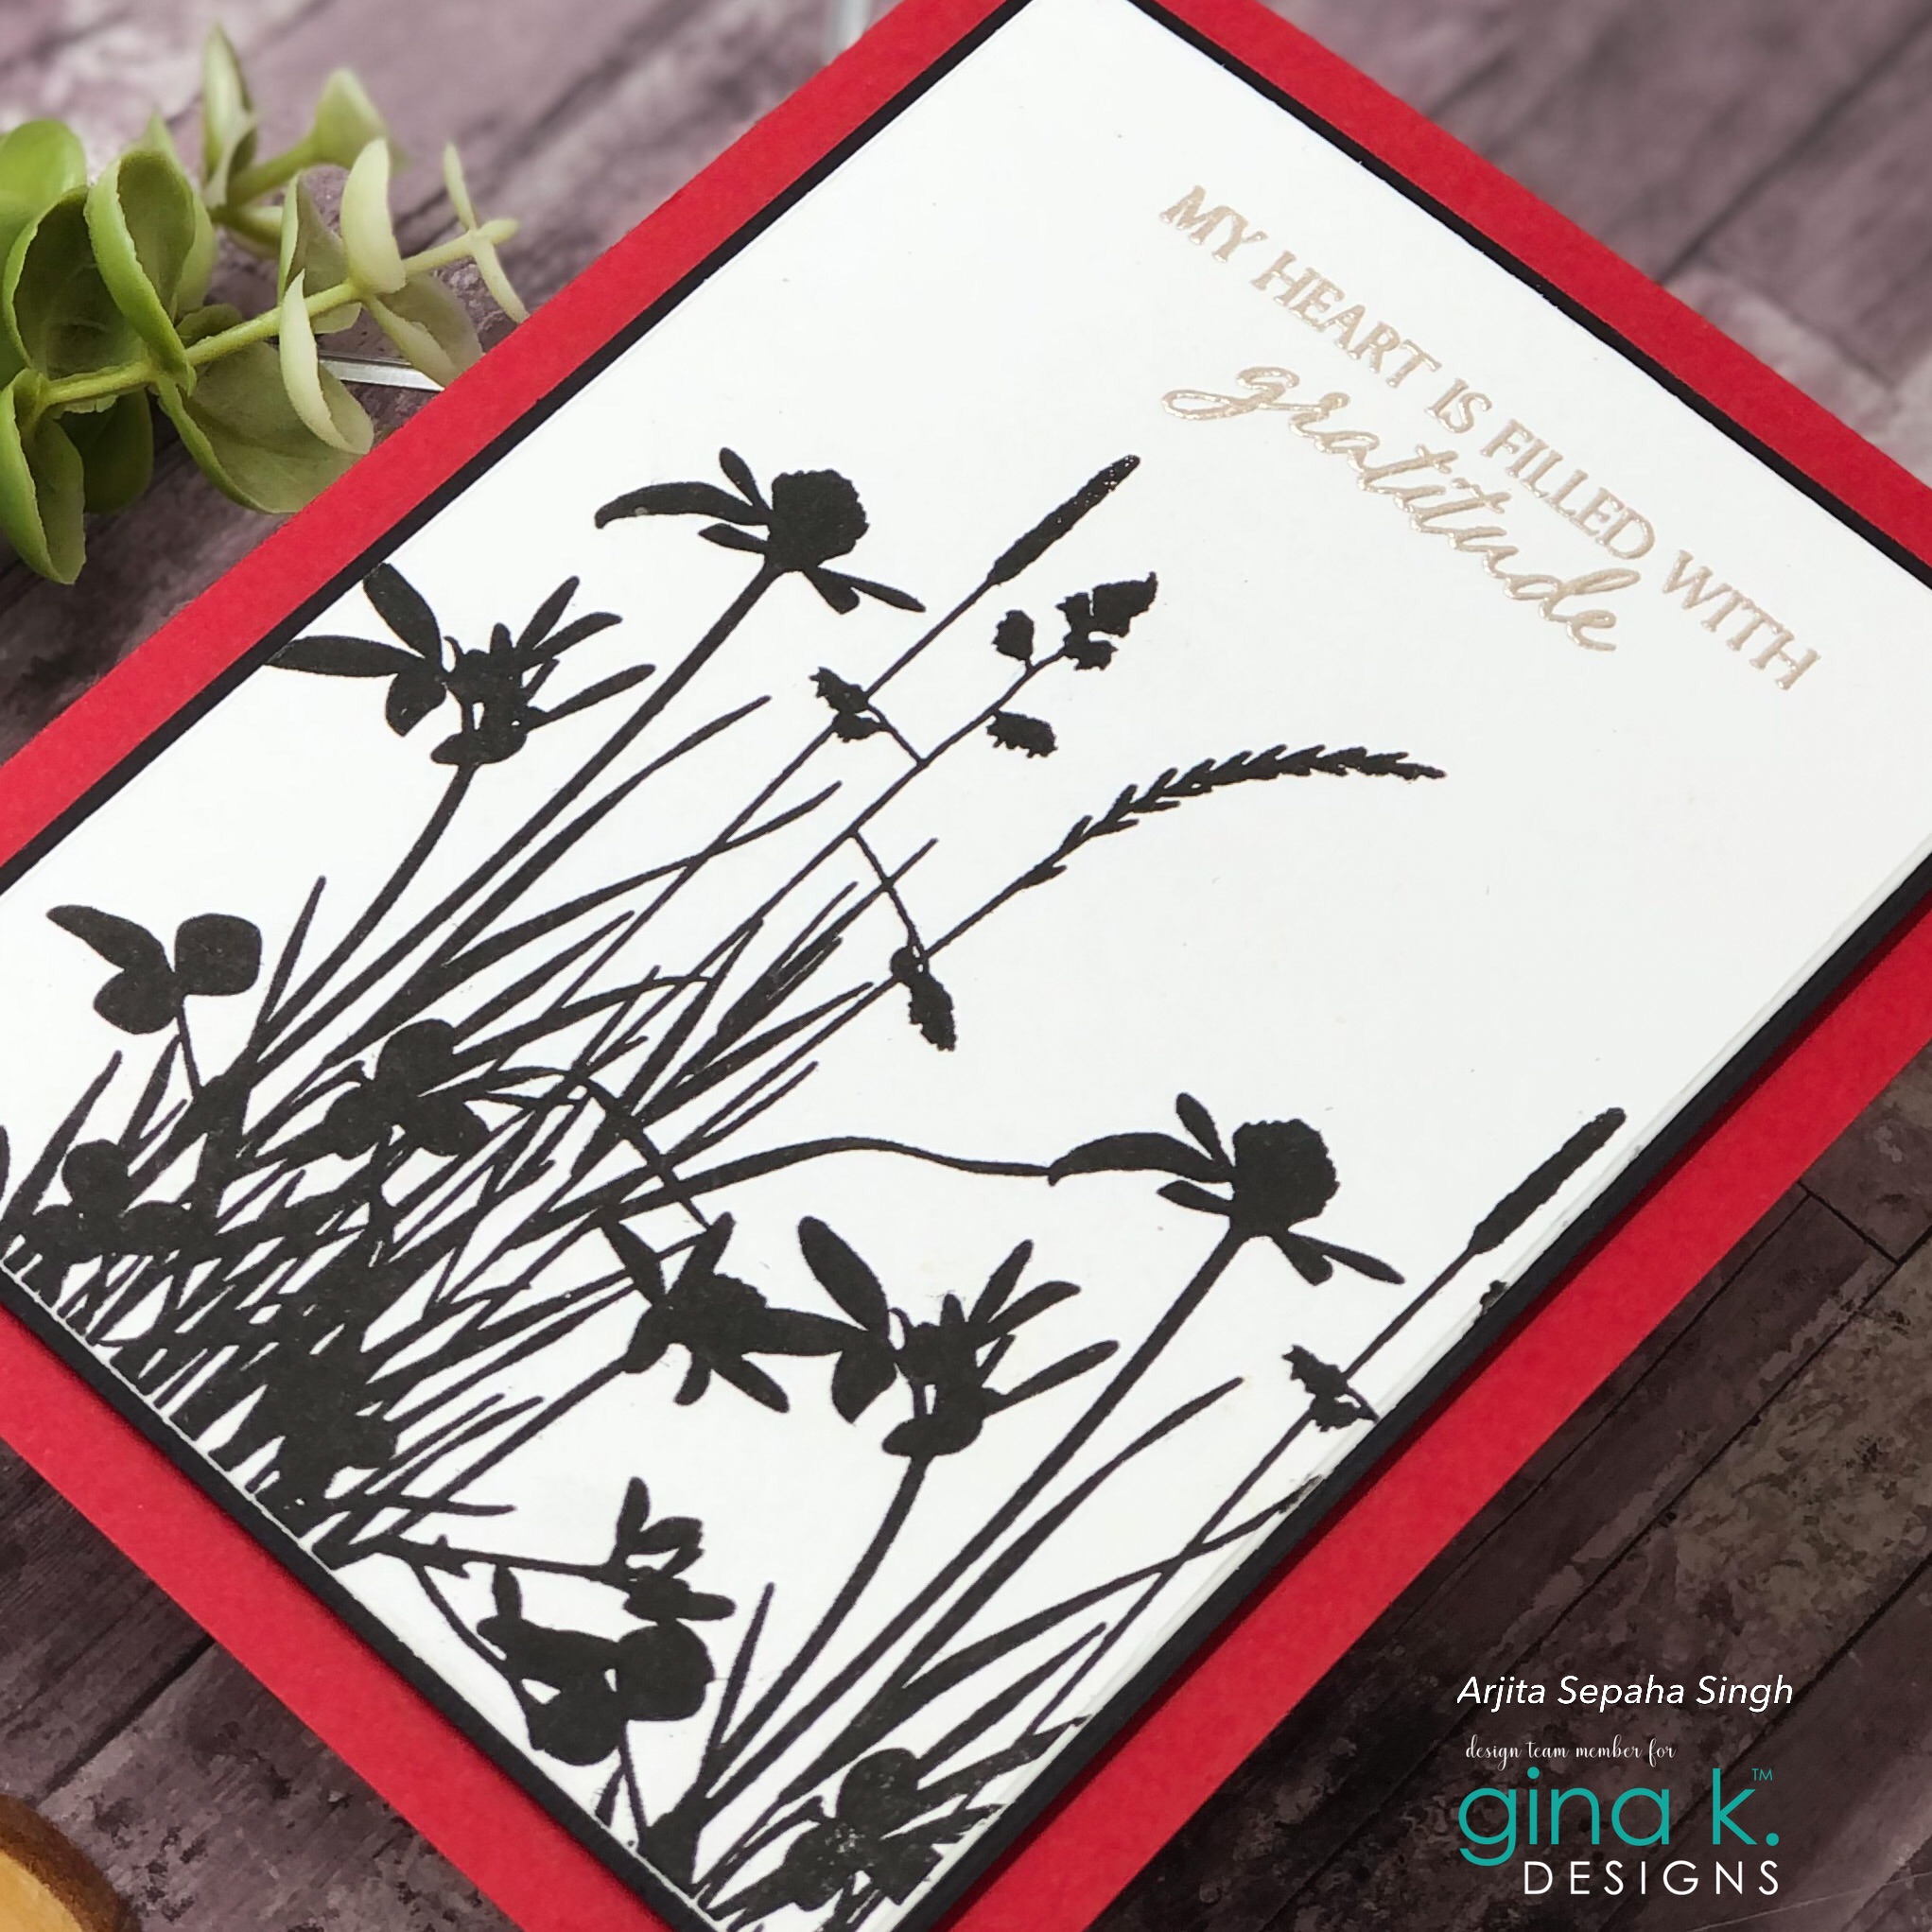 Paper Crafty's Creations : Gina K. Designs: May Release Blog Hop - Day 3